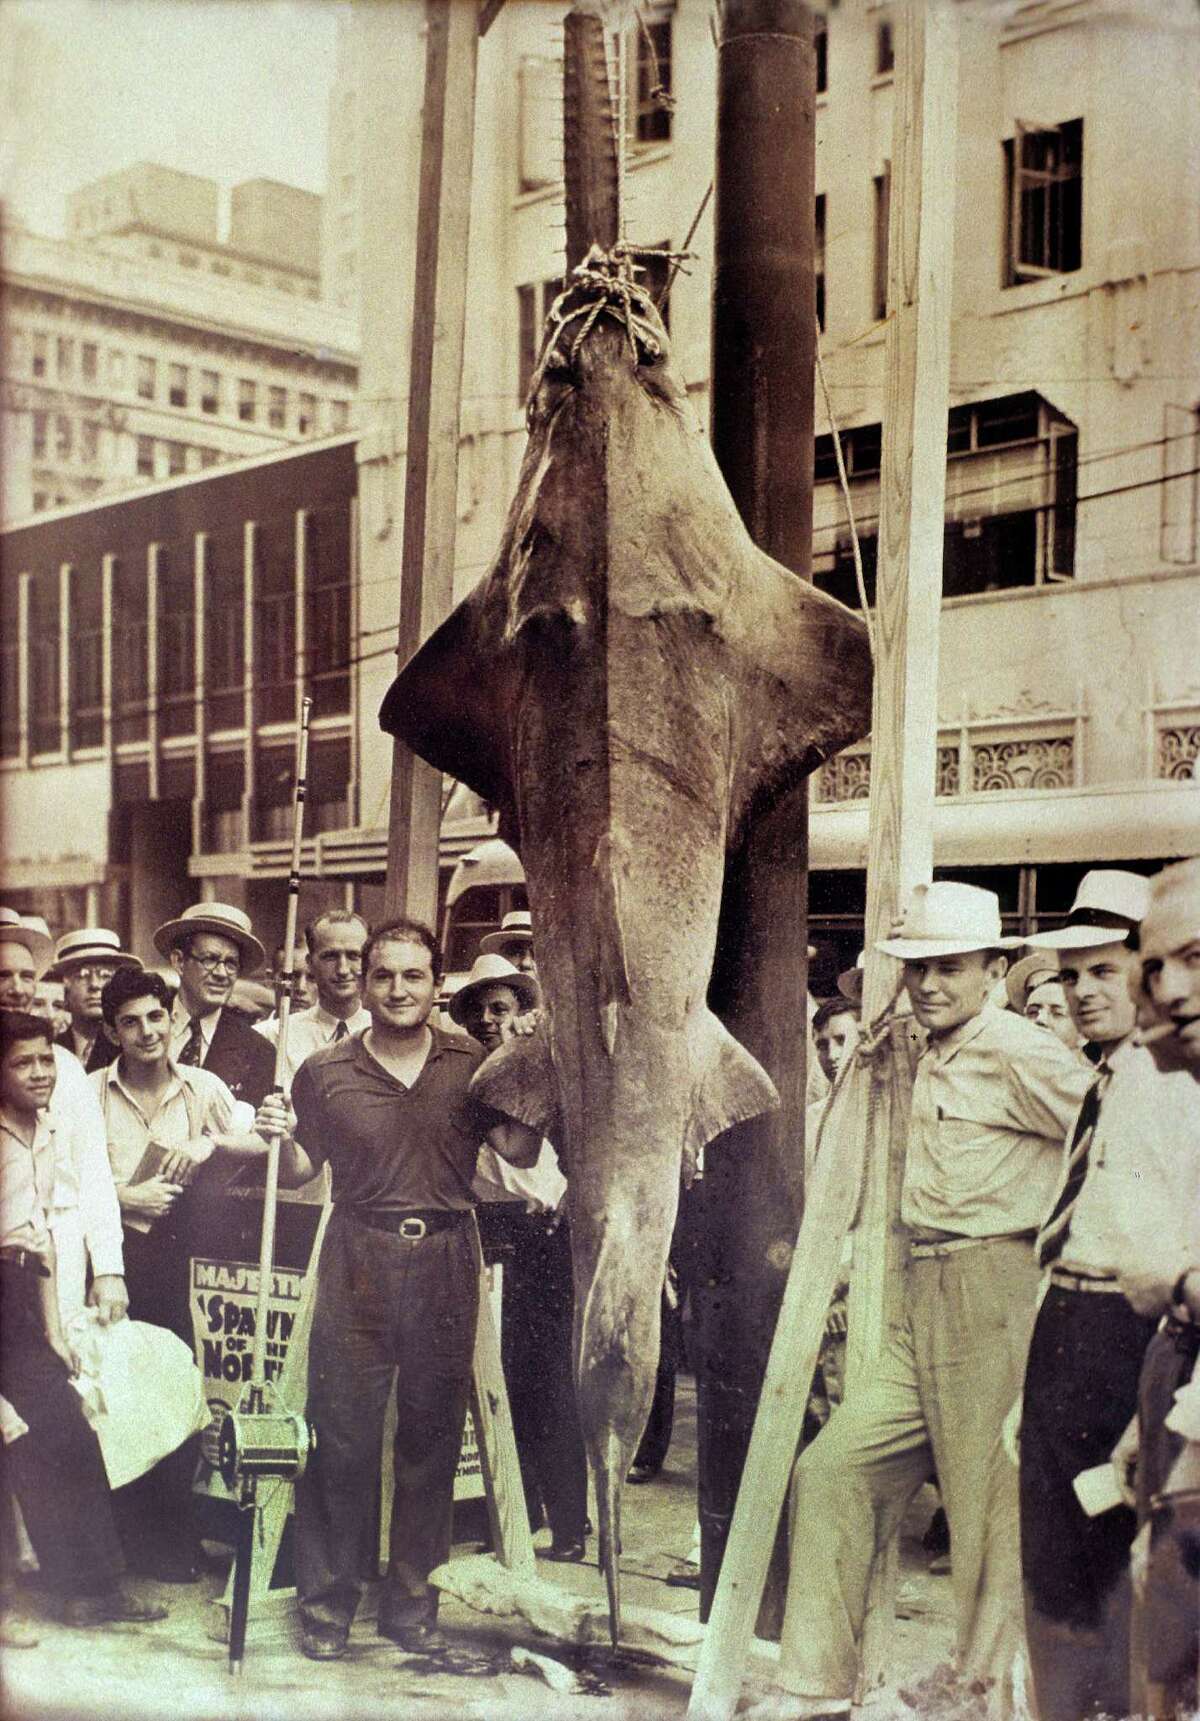 ﻿Gus Pangarakis ﻿﻿caught a 736-pound sawfish ﻿off Galveston's North Jetty in 1939 and brought it to downtown Houston. Battles with such mammoth fish could take three or more hours﻿. ﻿